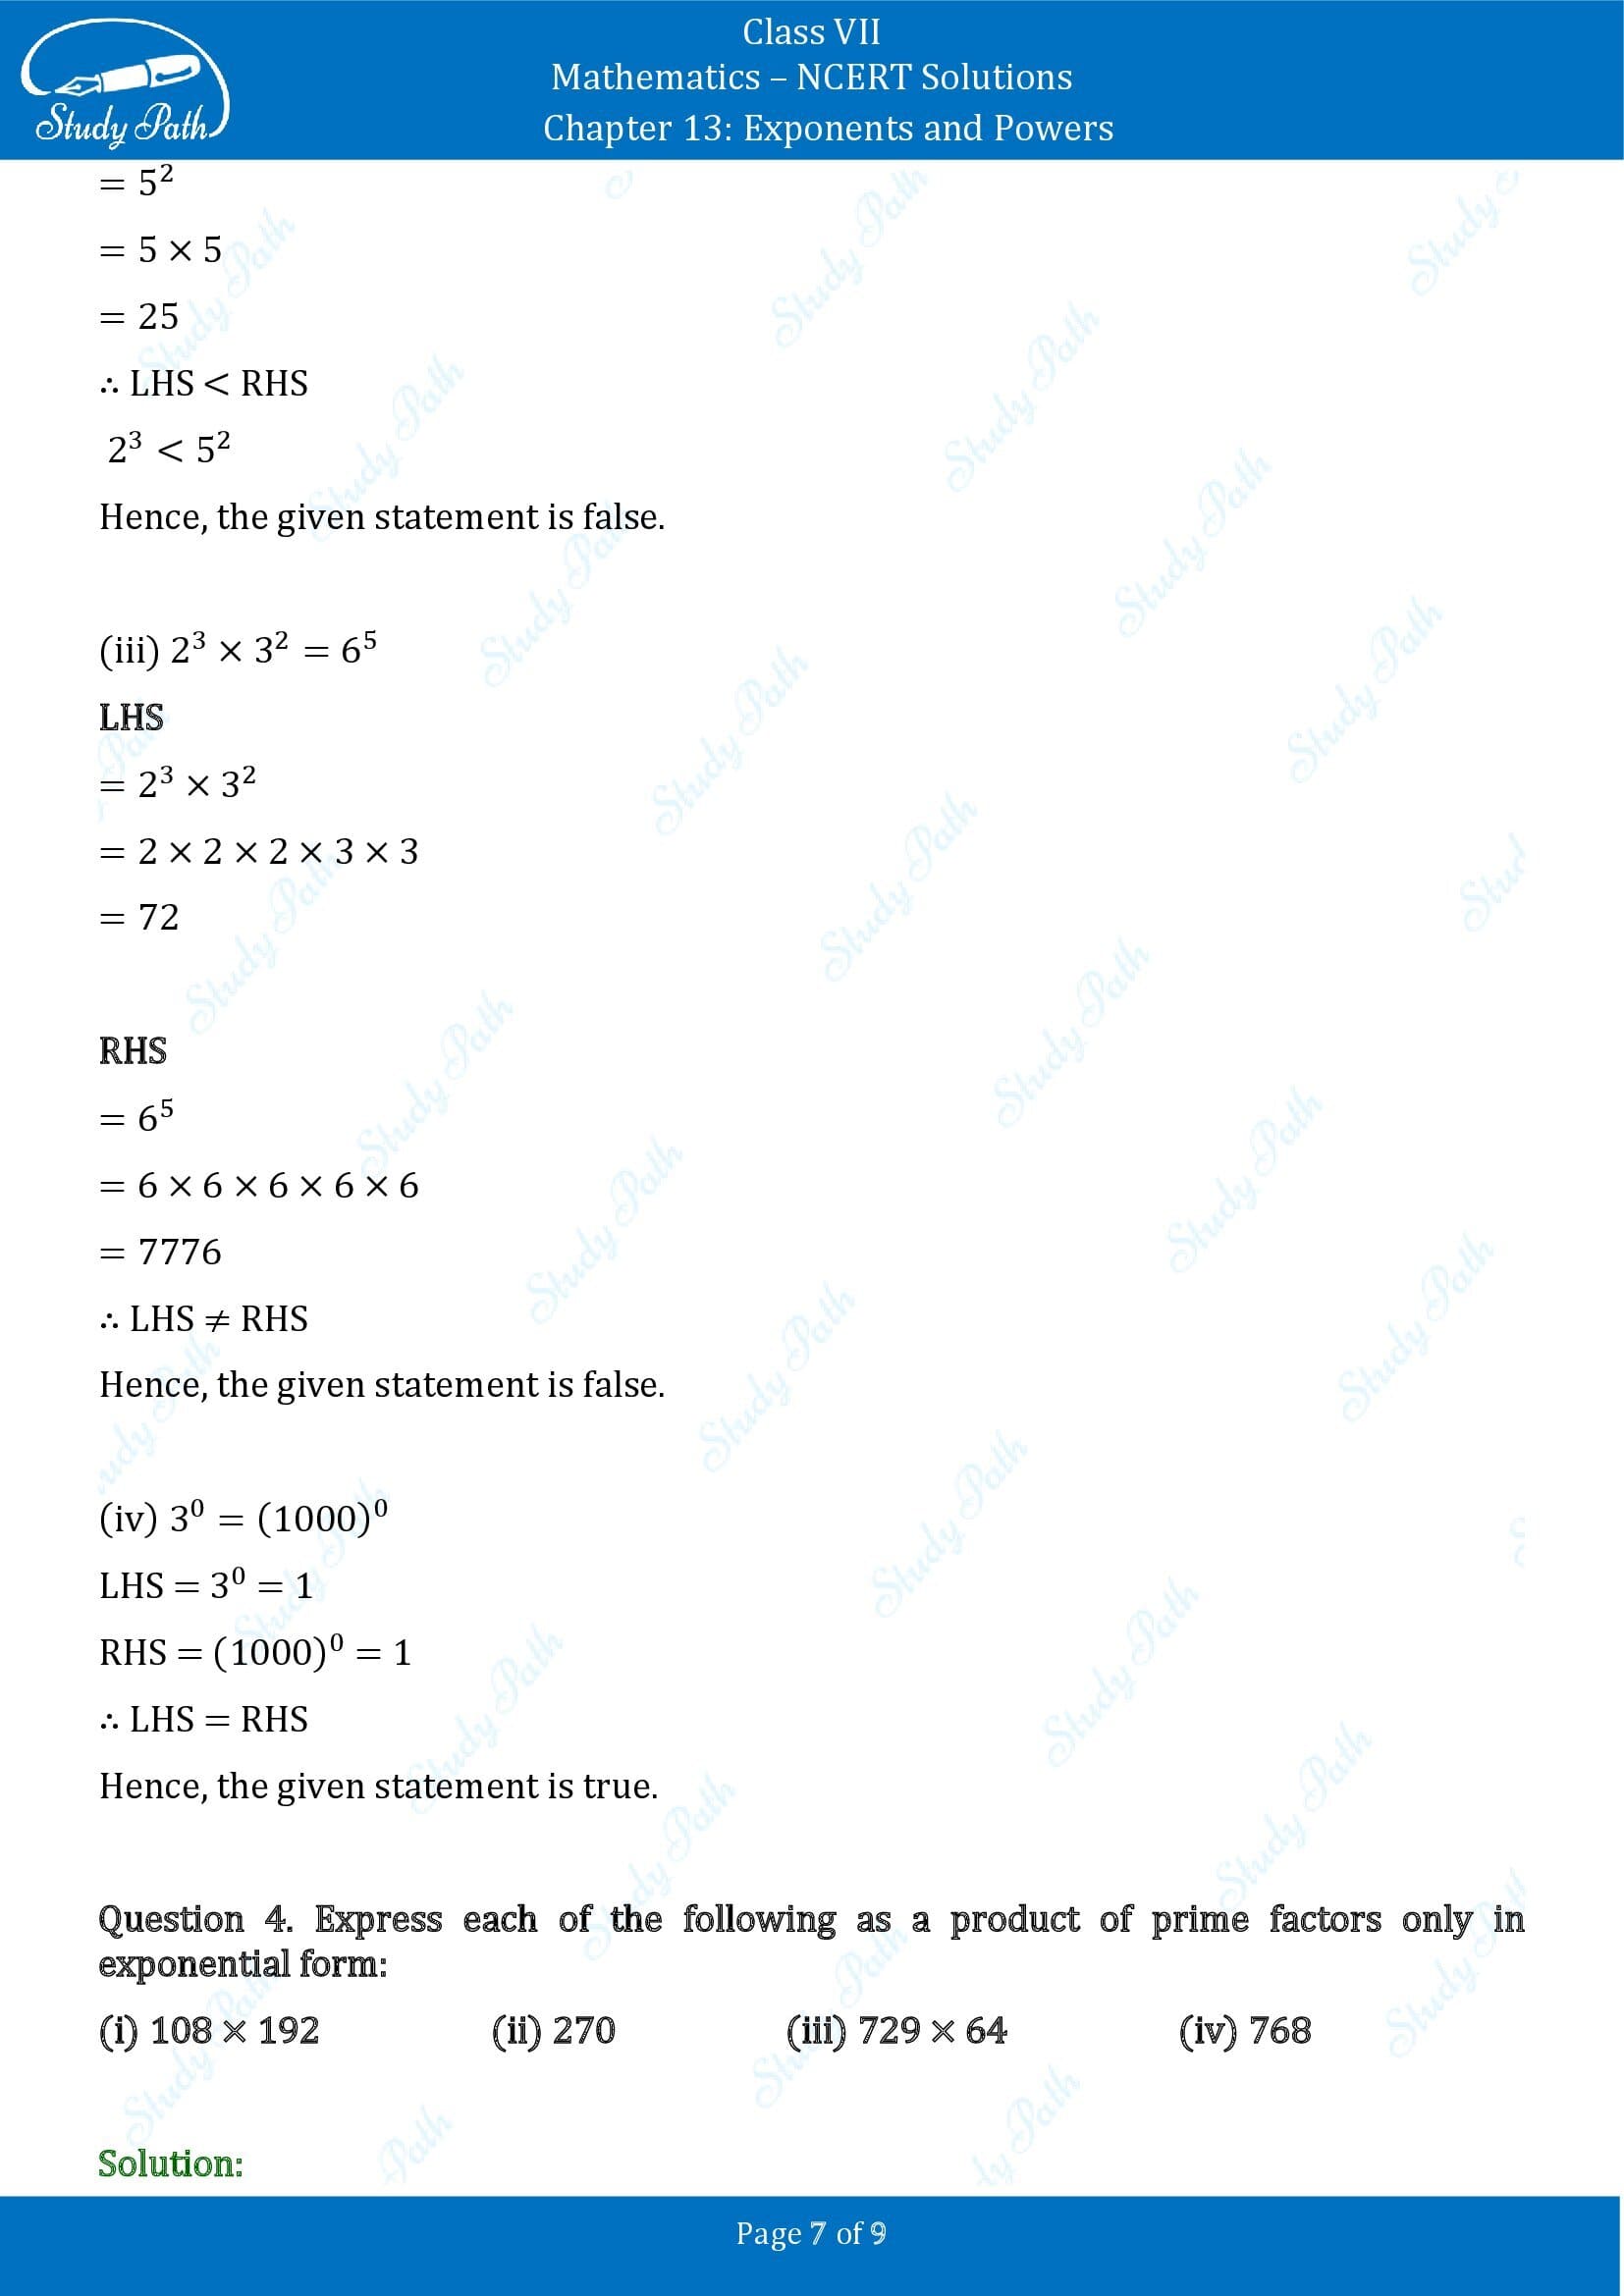 NCERT Solutions for Class 7 Maths Chapter 13 Exponents and Powers Exercise 13.2 00007